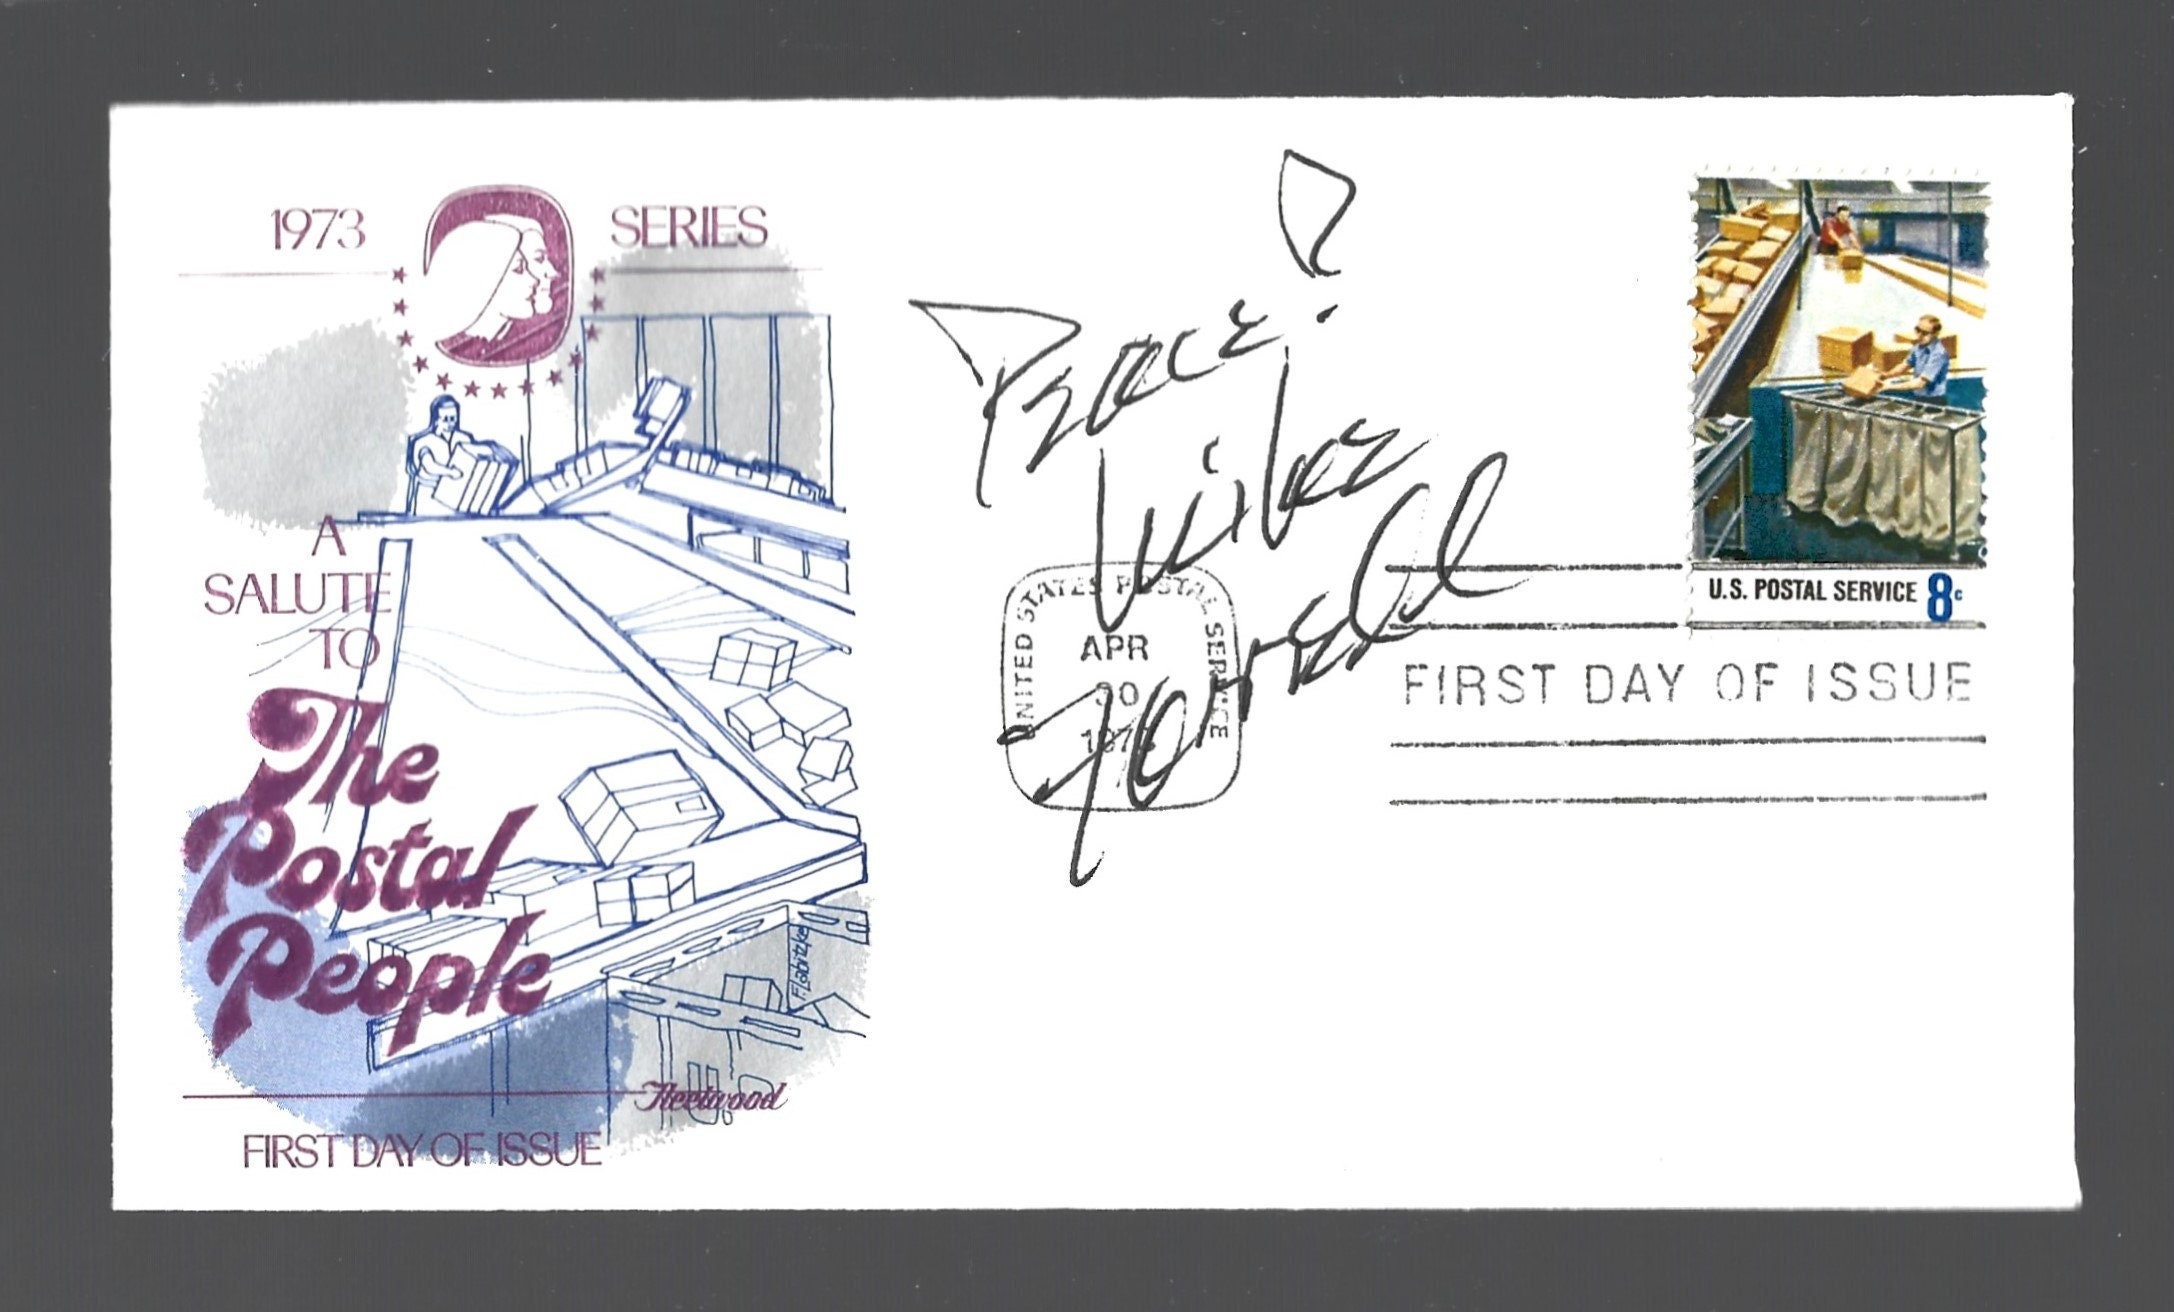 Actor Mike Farrell MASH TV Show Autographed Postal FDC - Etsy Hong